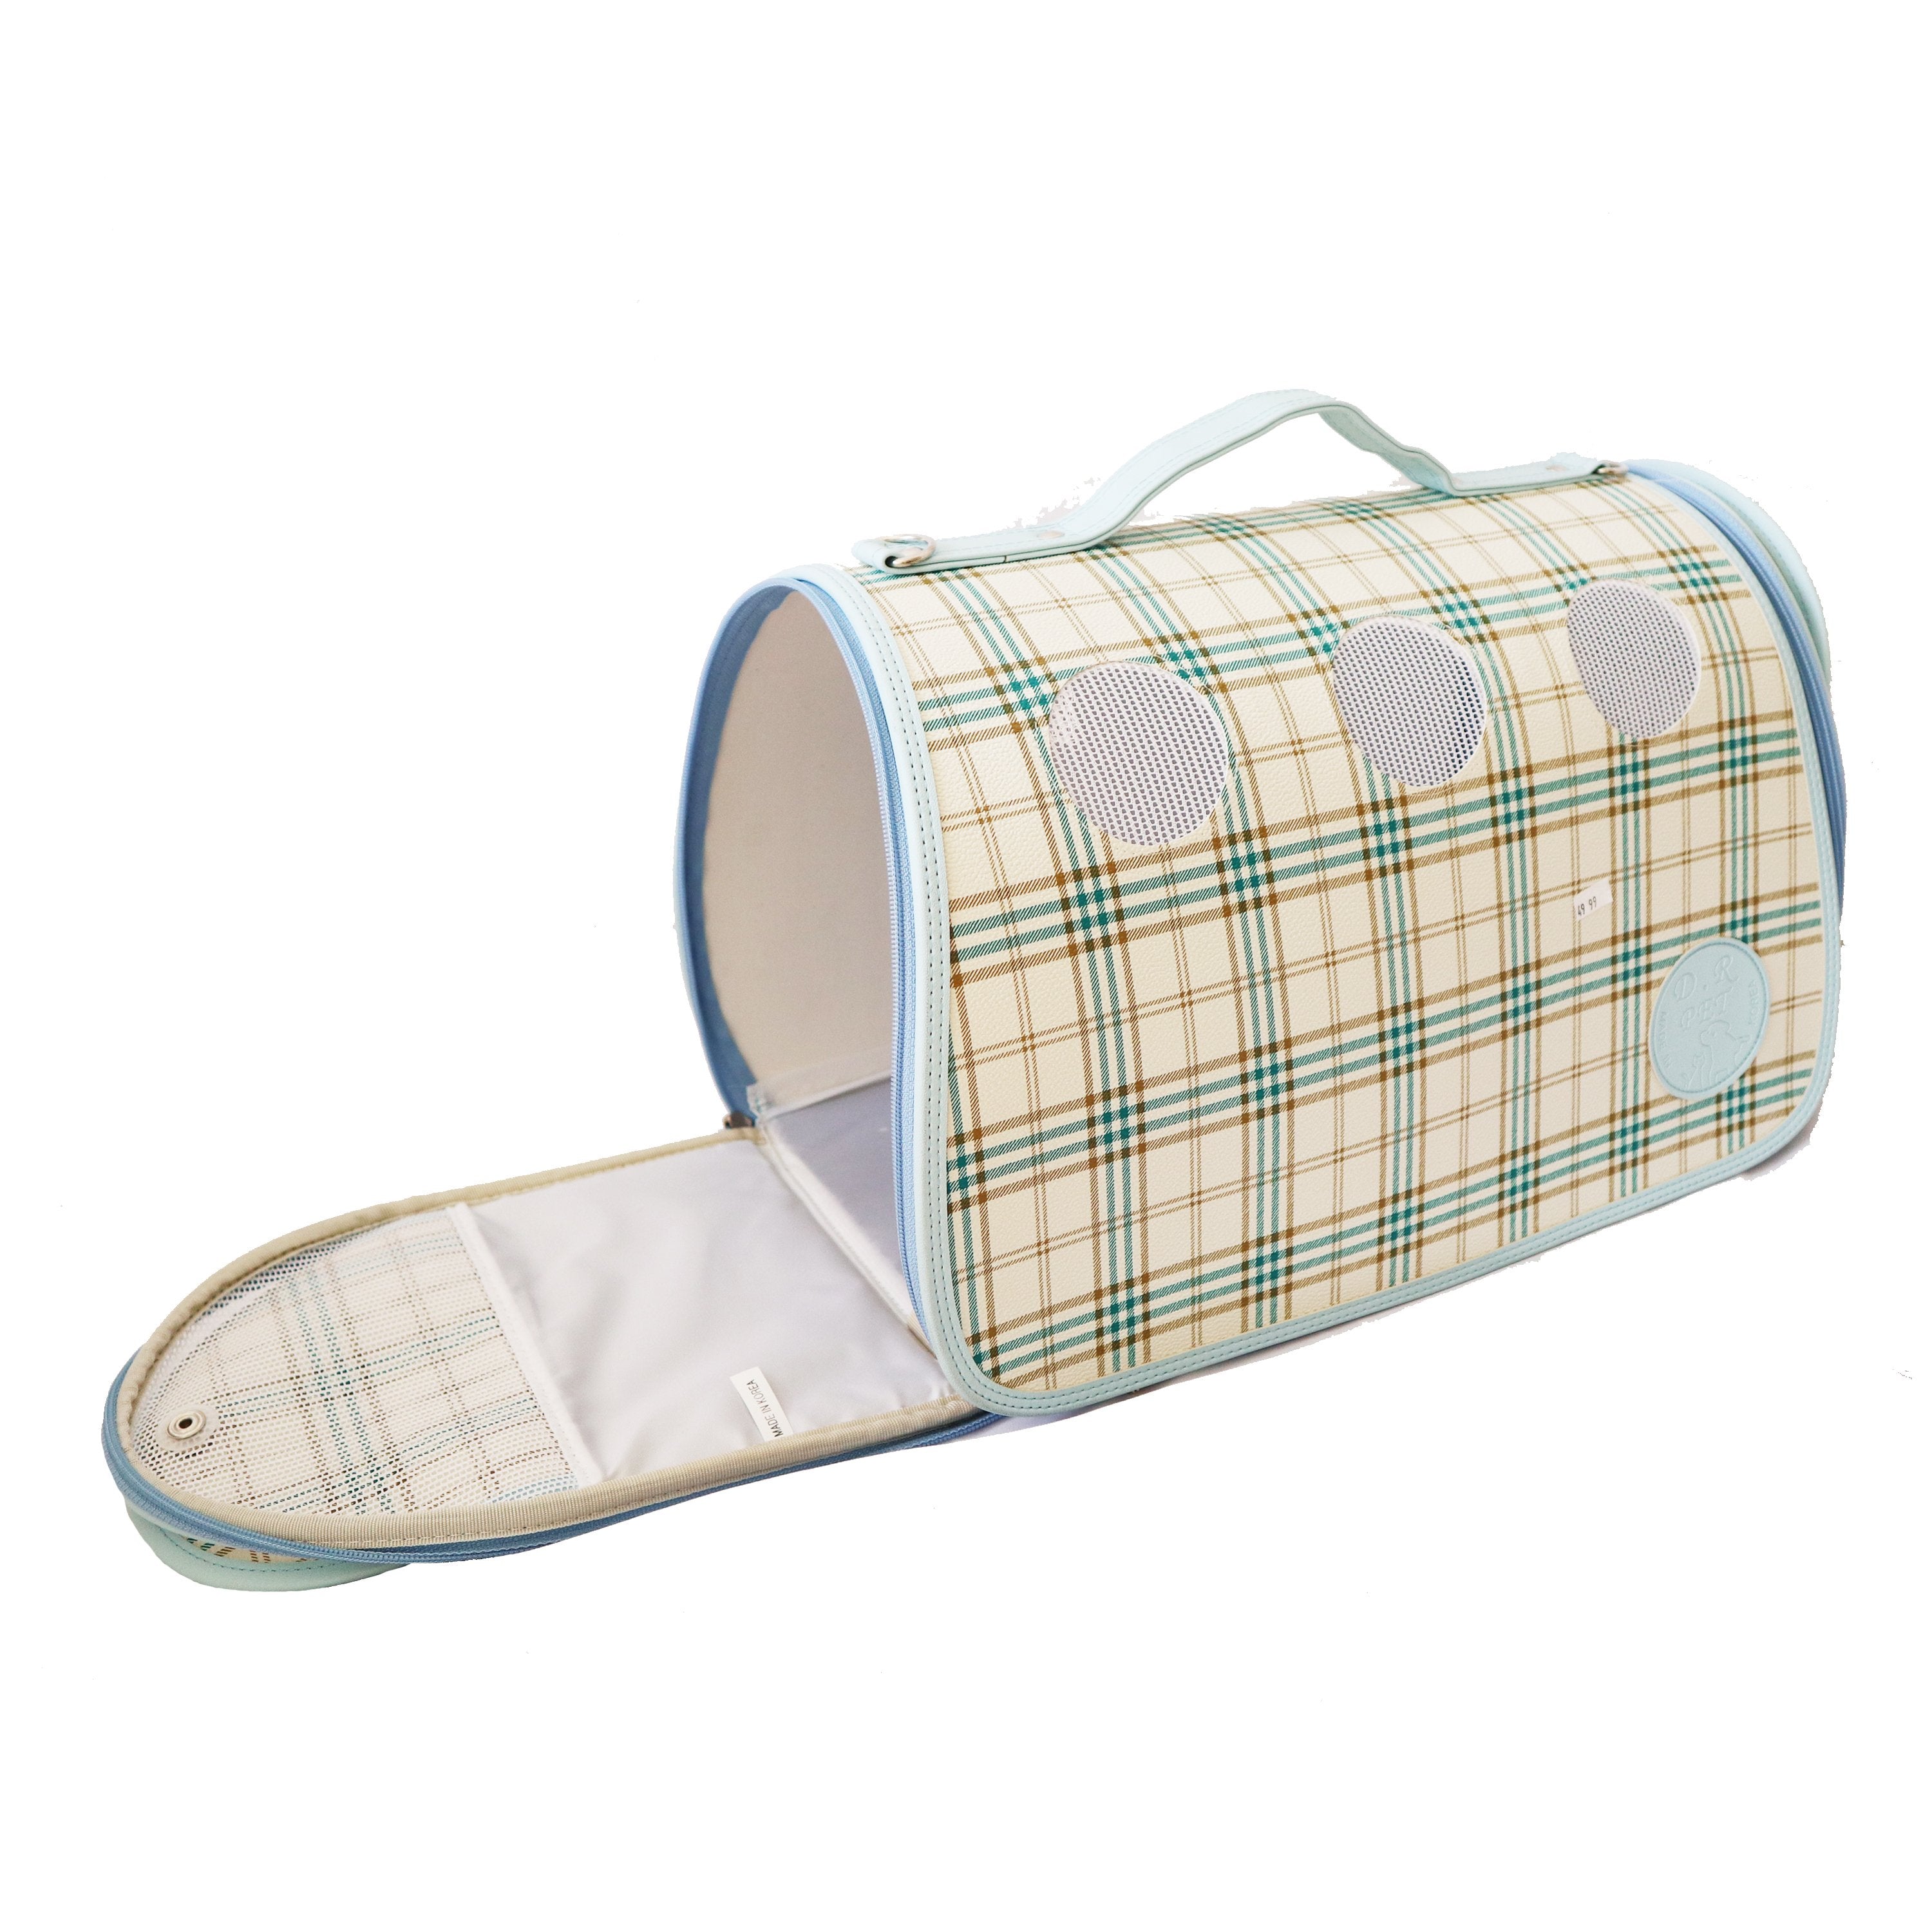 Luxurious Baby Blue Plaid Small Carrier for Small Dogs and Cats. Breathable mesh circles & side panels for protective visibility. Leather Case with top handle and strap with padding. Side Opening Image 